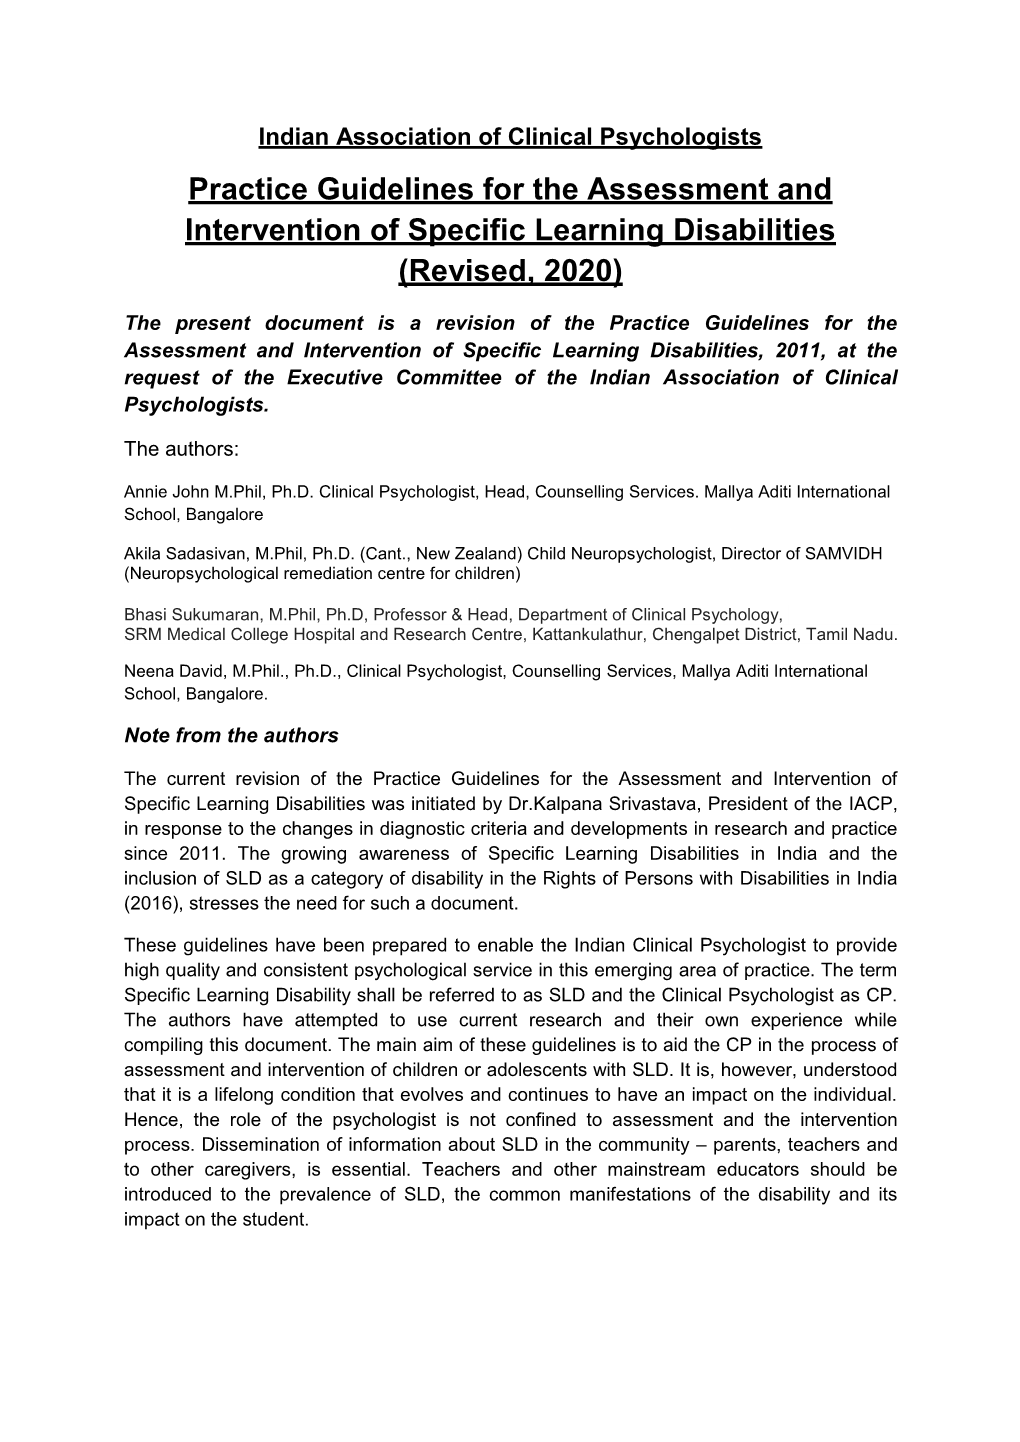 Practice Guidelines for the Assessment and Intervention of Specific Learning Disabilities (Revised, 2020)